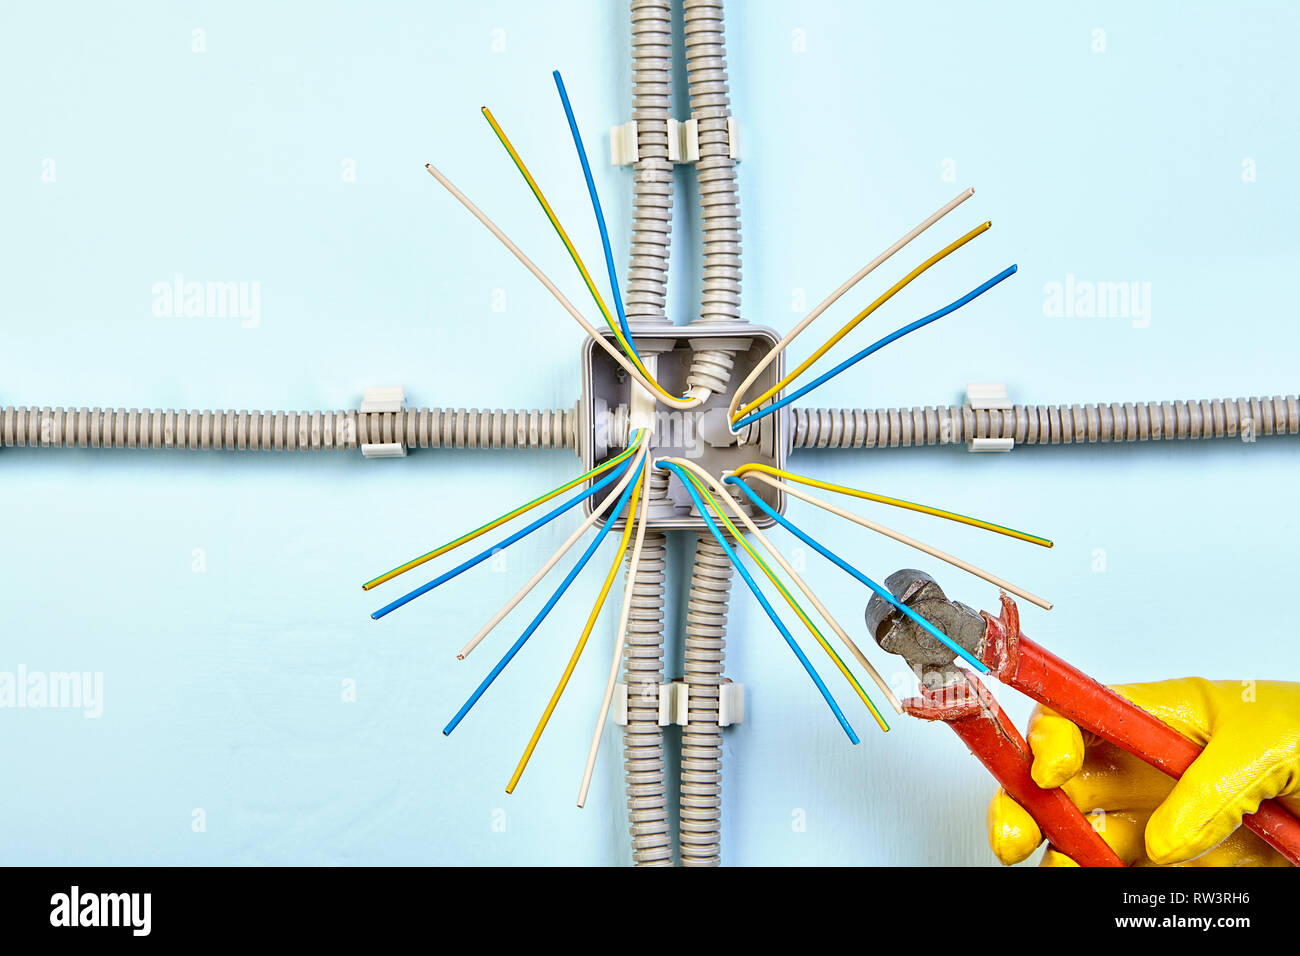 Junction Box Wiring High Resolution Stock Photography and Images - Alamy